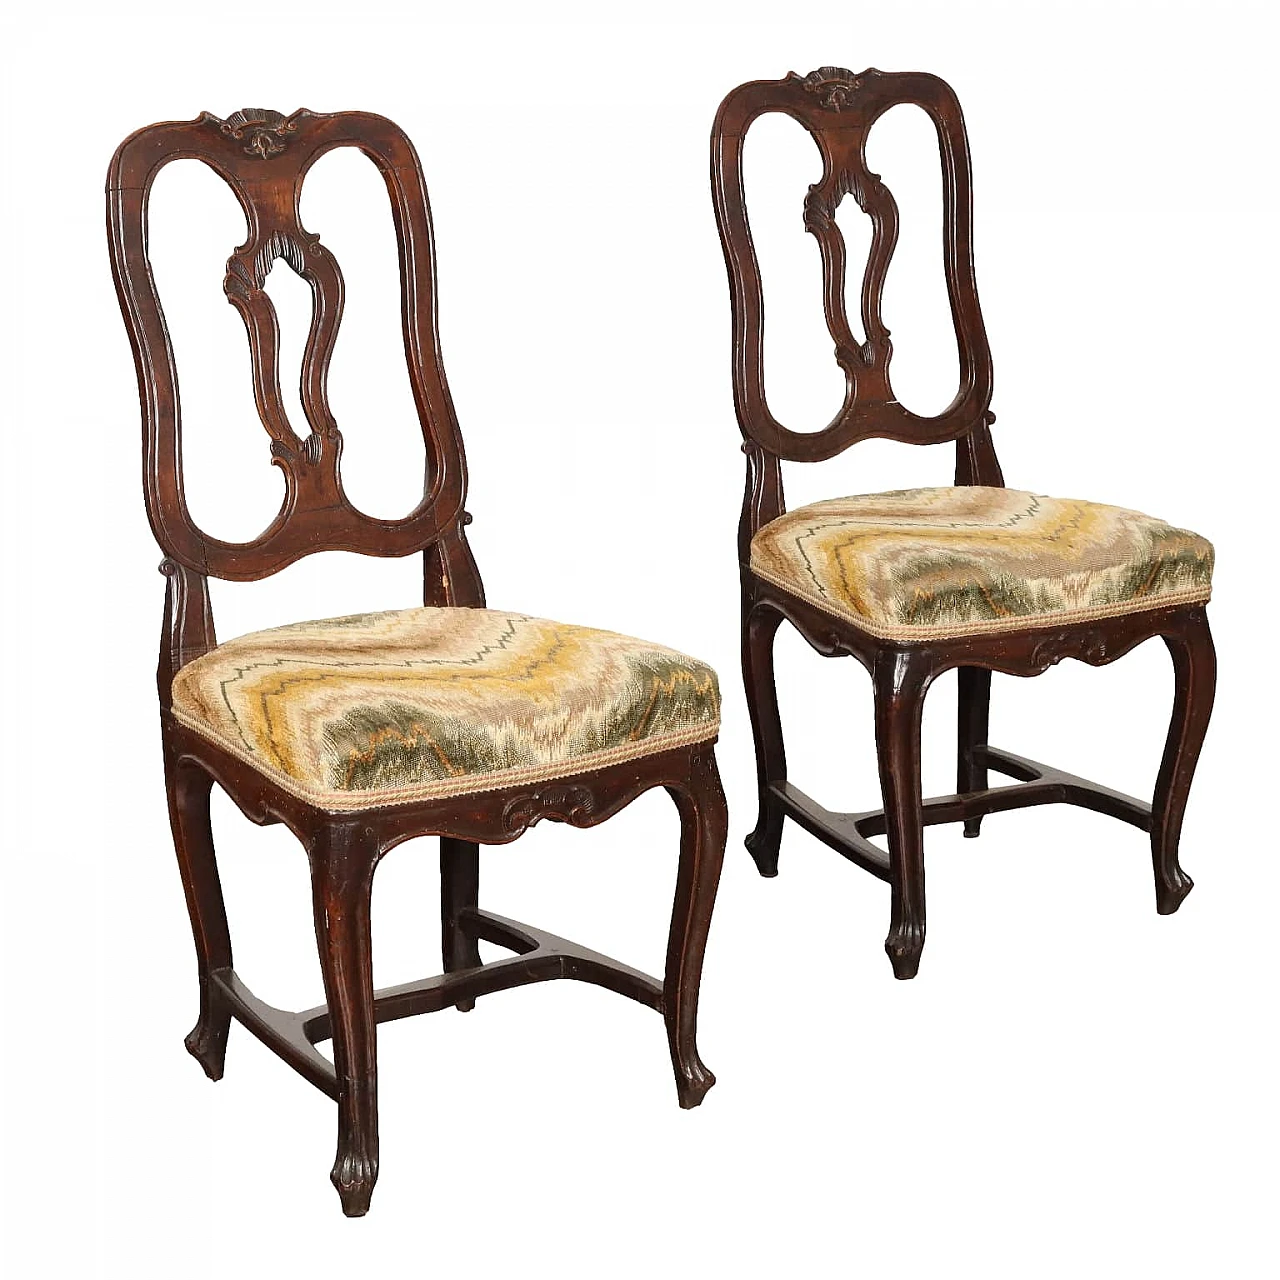 Pair of carved walnut chairs with padded seat, 18th century 1